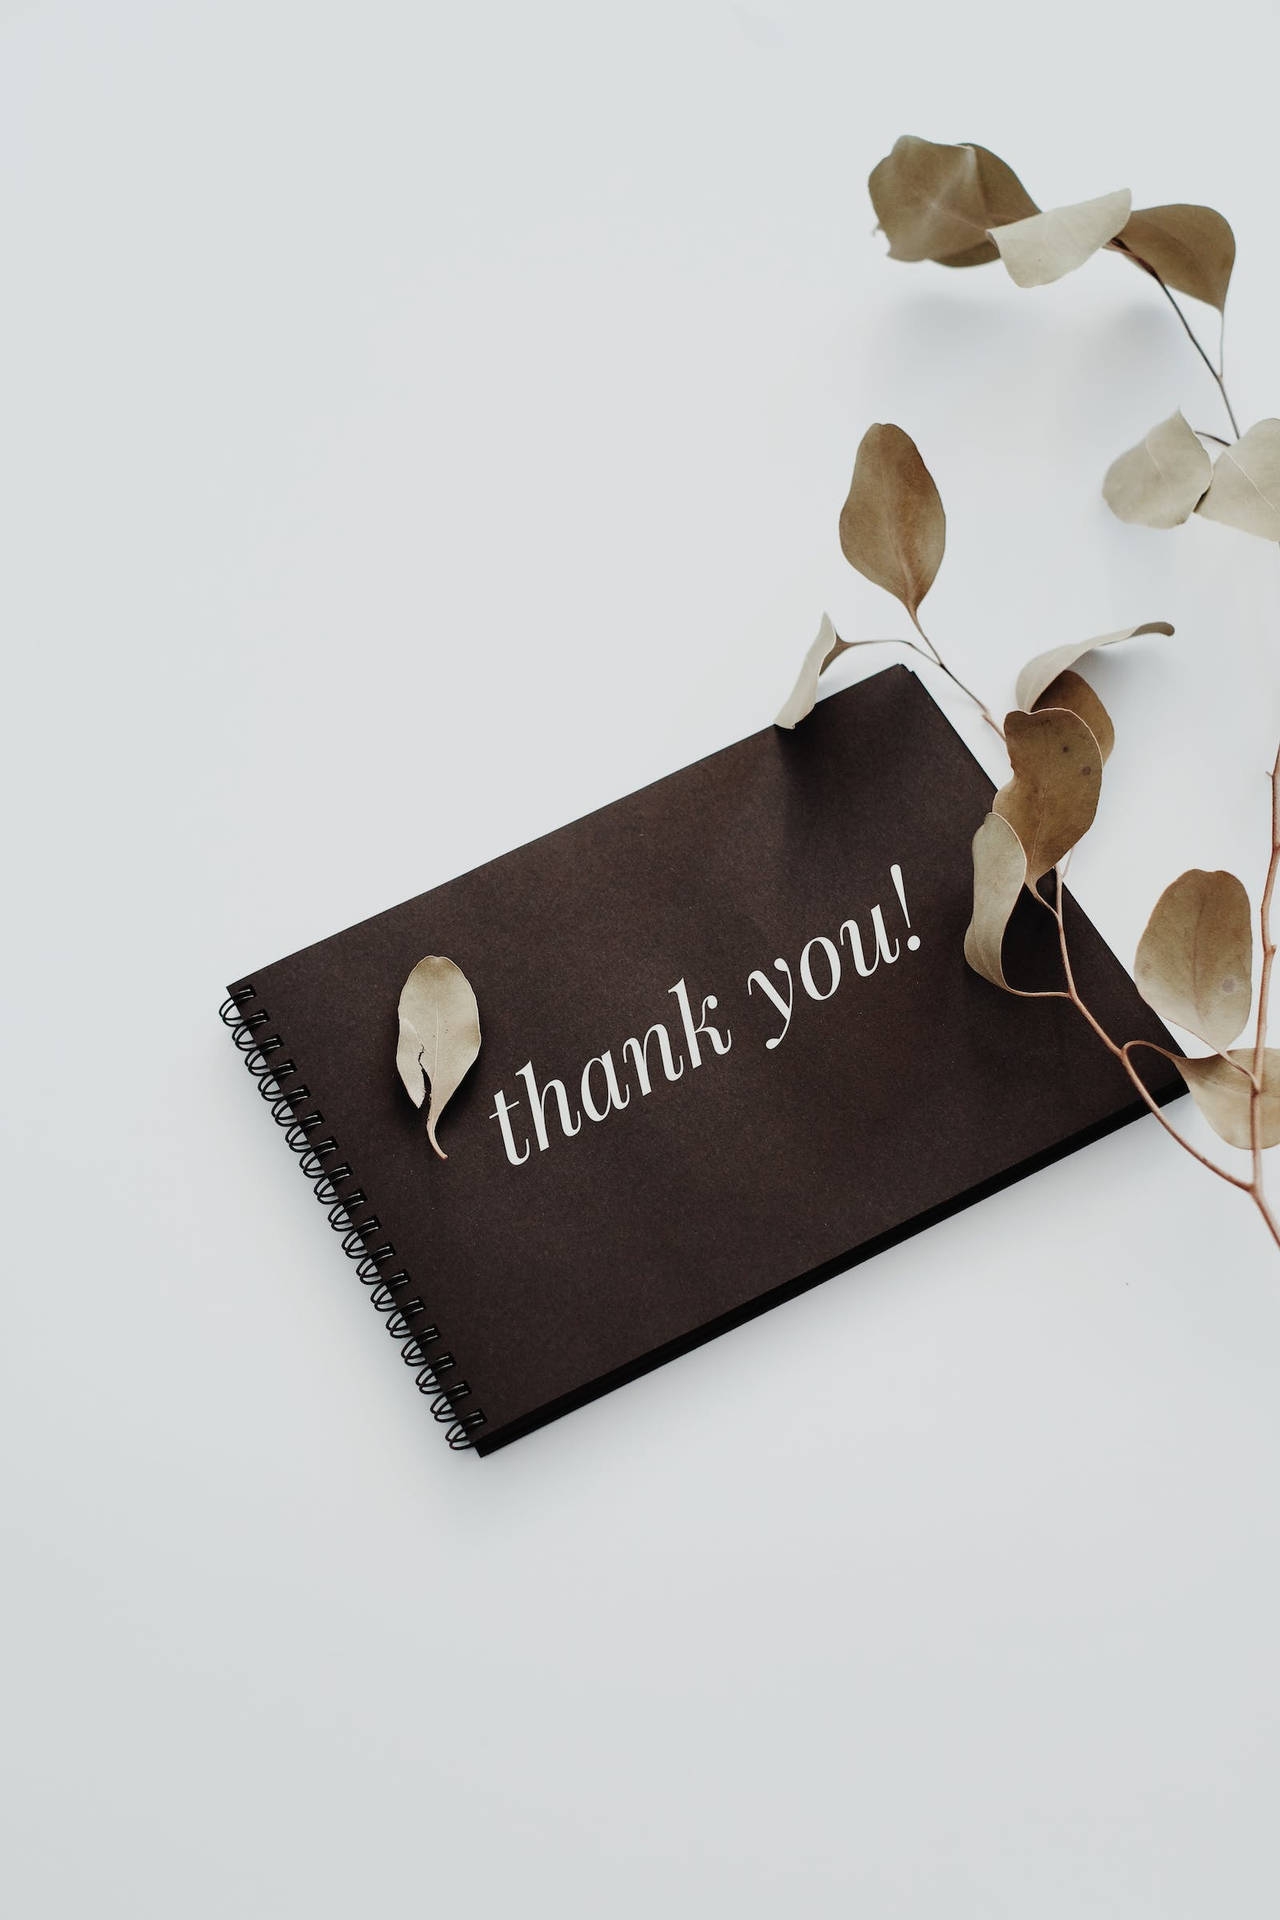 A Gratitude Gesture - An Aesthetic Thank You Notebook Background